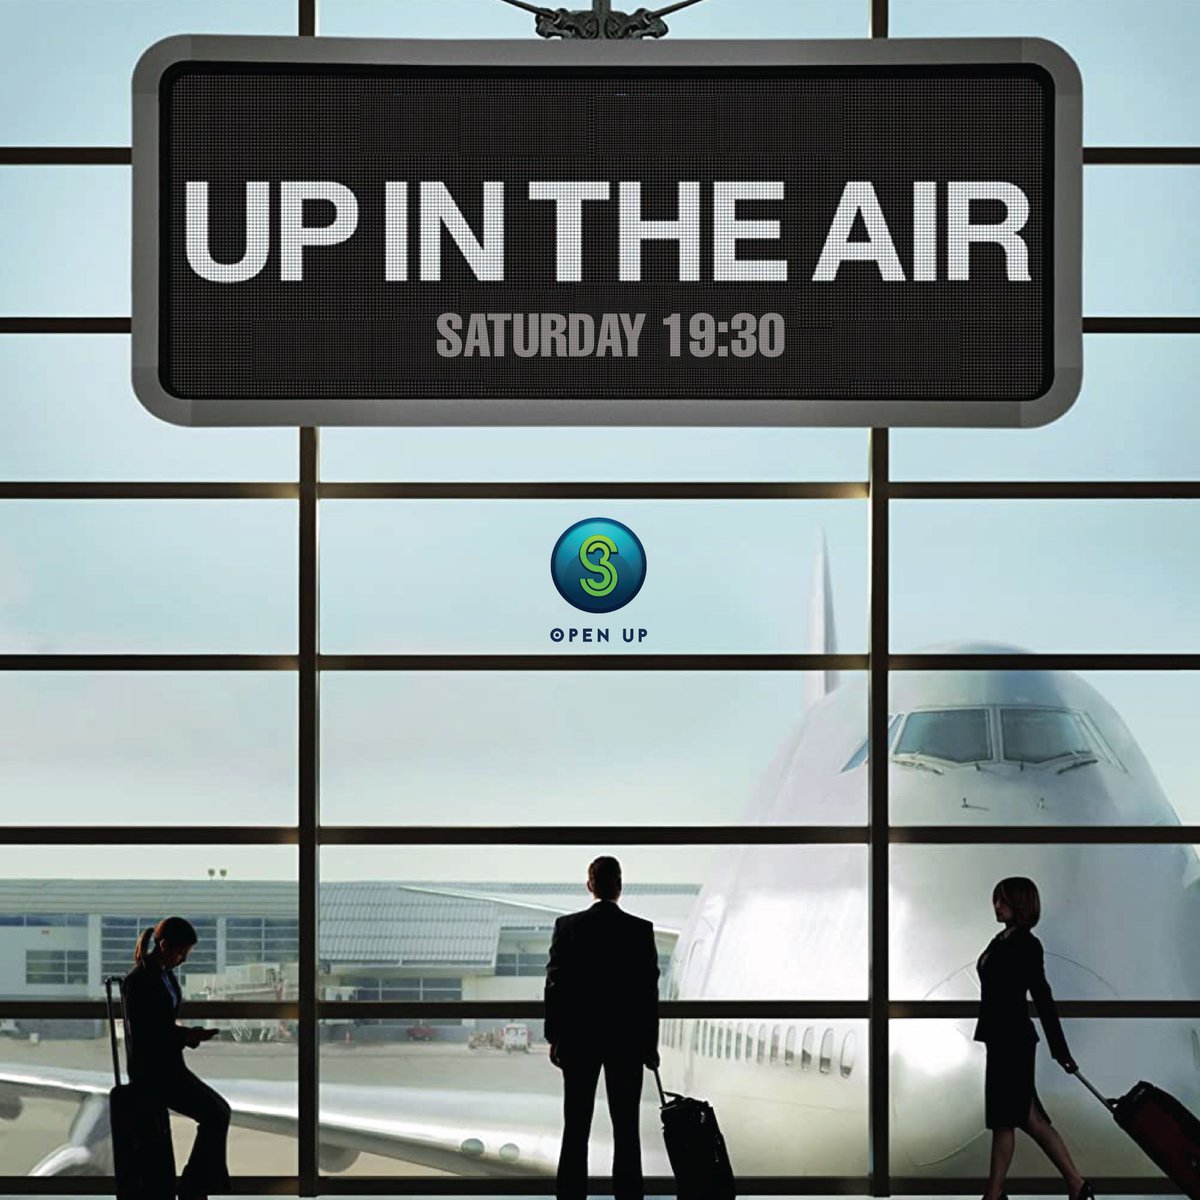 Tonight at 19:30 on Up In The Air; Ryan, a corporate downsizing expert, takes his new colleague on his office tour. On the way, he meets another flier and the two begin a casual relationship. #S3OpenUp #S3FearlessByNature